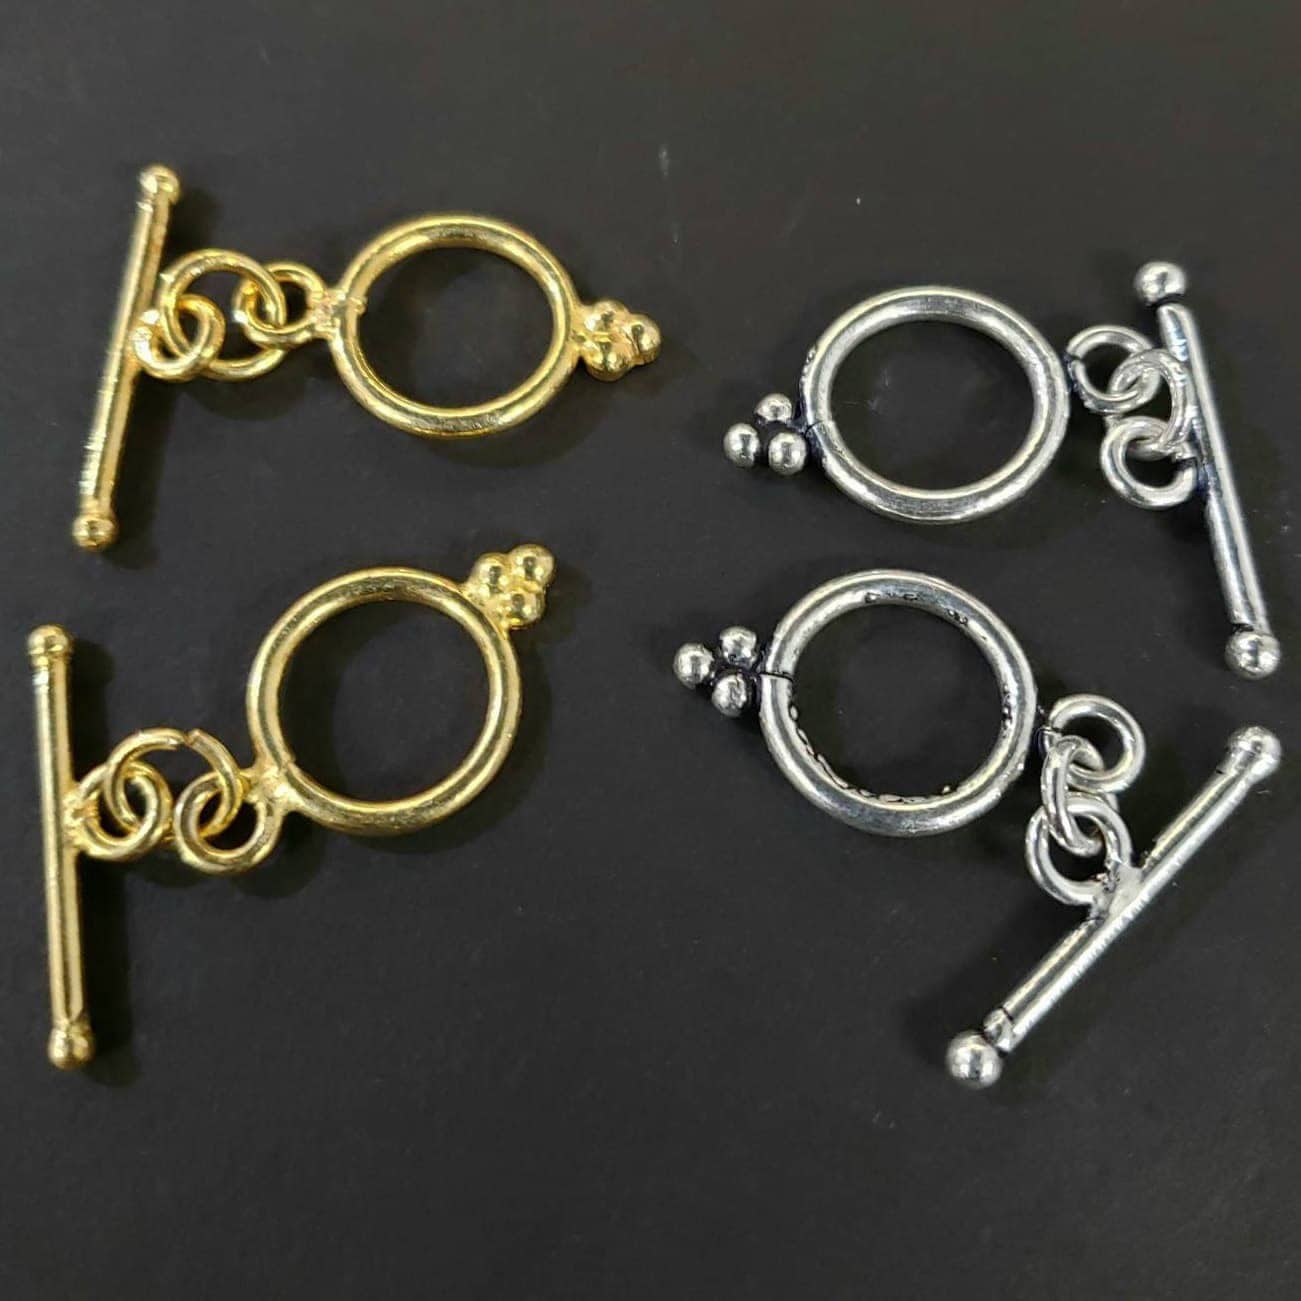 925 sterling silver and 22k gold vermeil bali toggle clasp 12mm round jewelry making clasp. 1 set